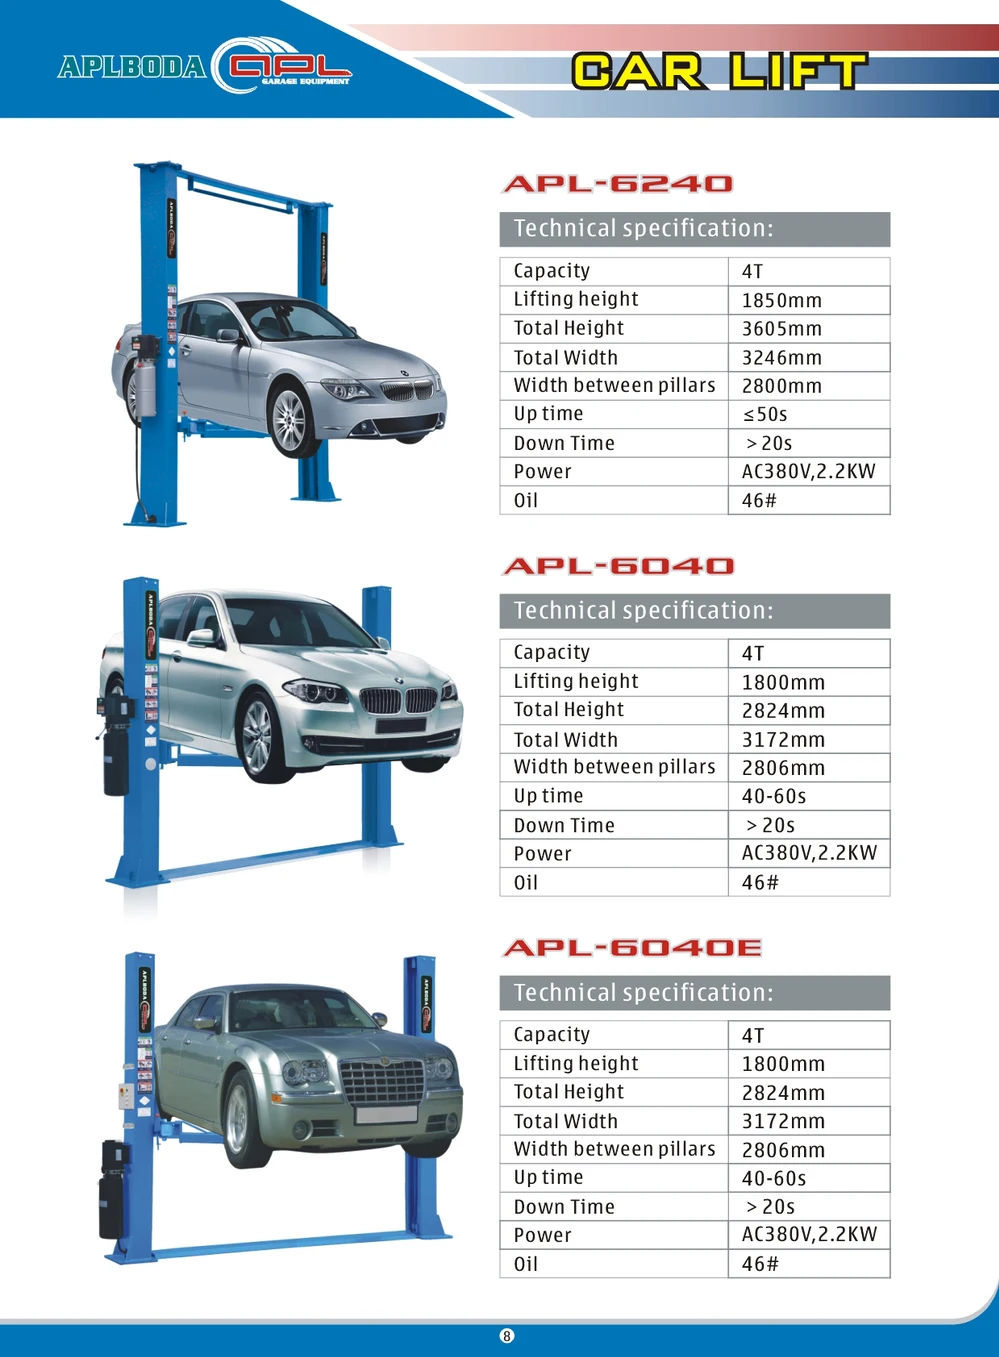 Where can you find used vehicle lifts for sale?